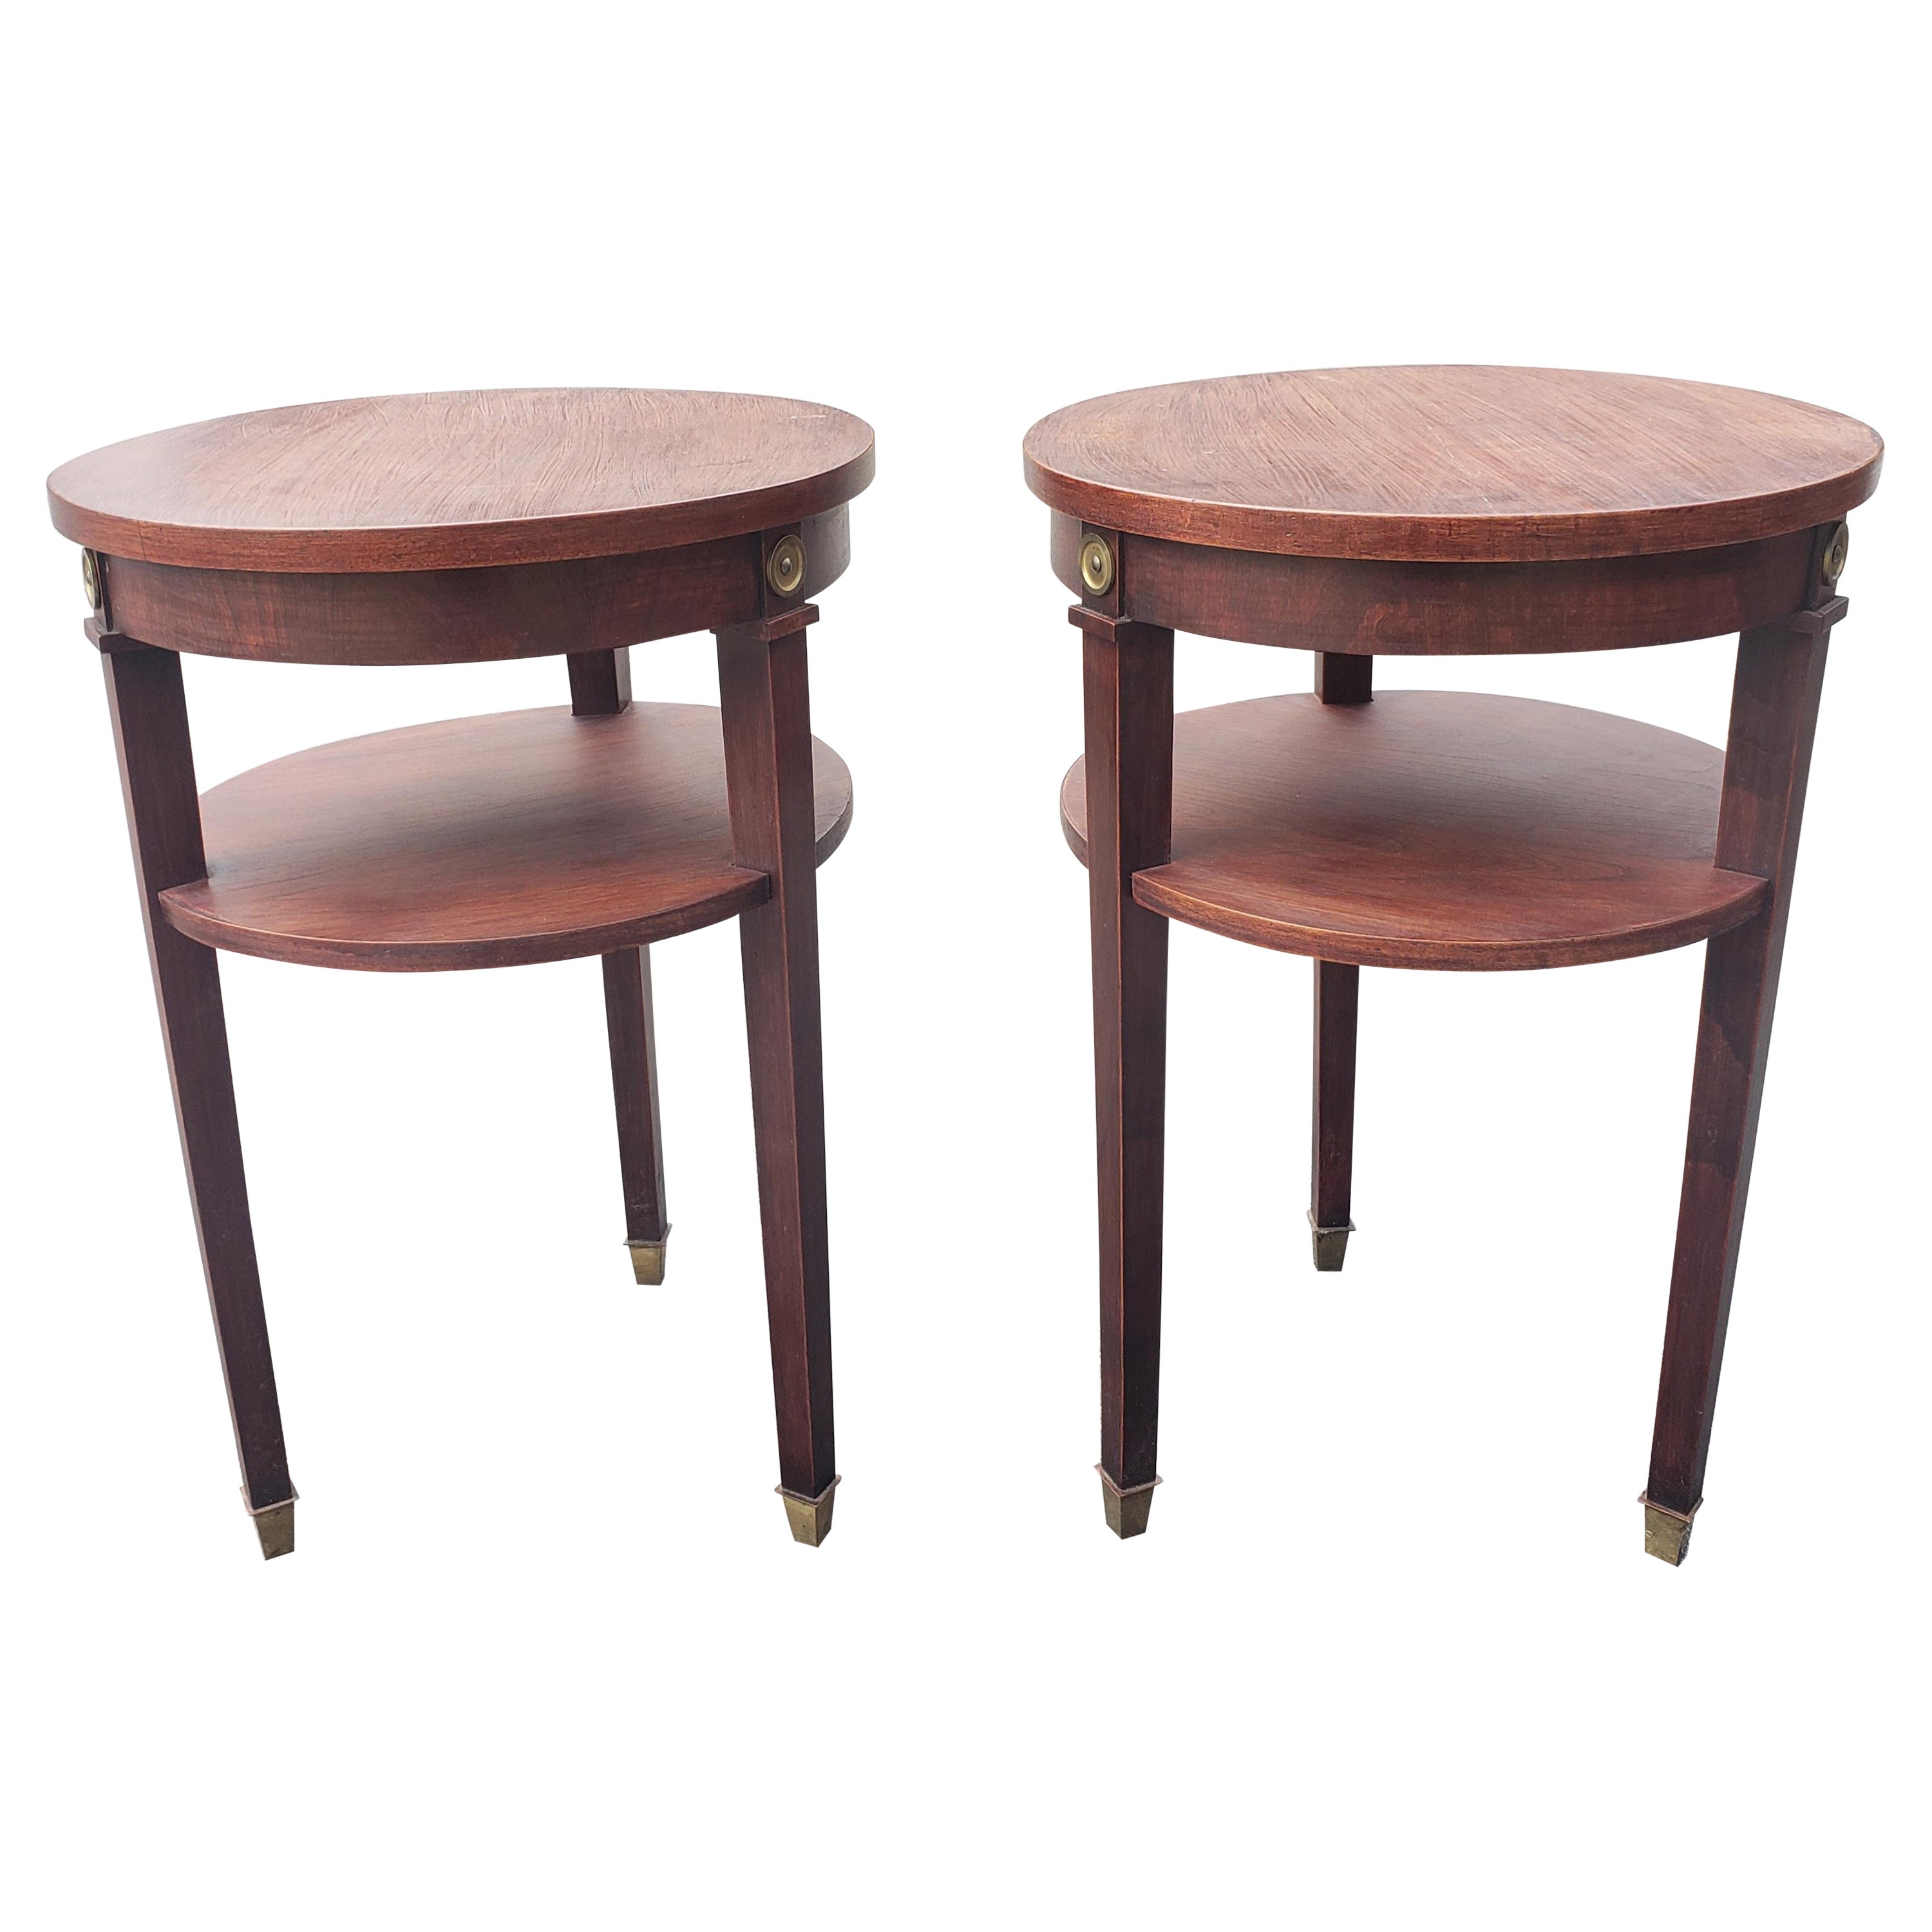 1950s Refinished Mahogany 2-Tier Round Candle Stand with Brass Capped Legs, Pair For Sale